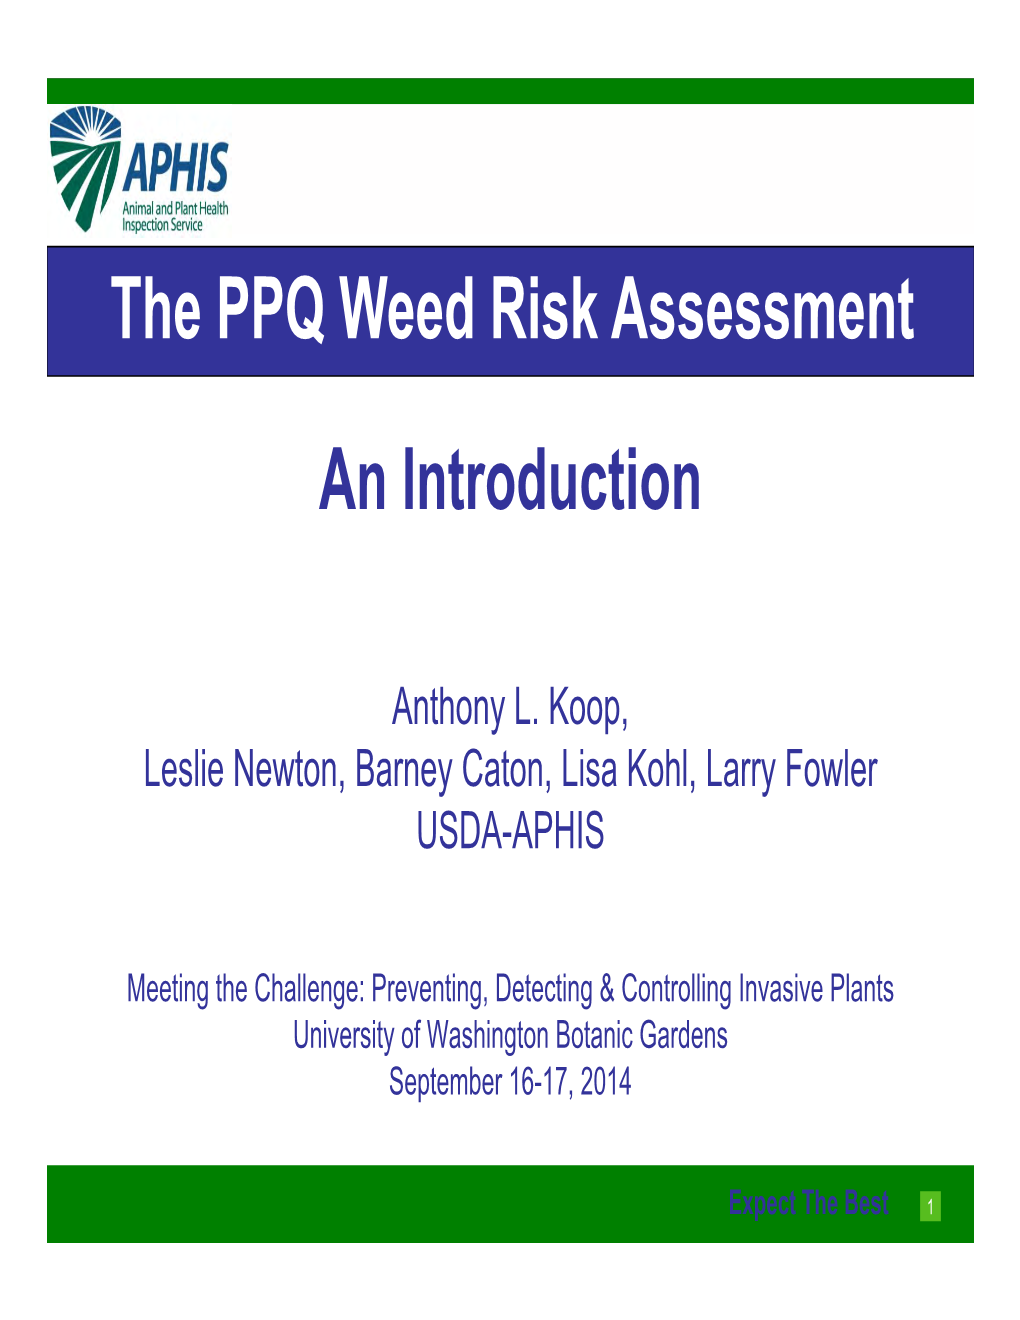 An Introduction the PPQ Weed Risk Assessment